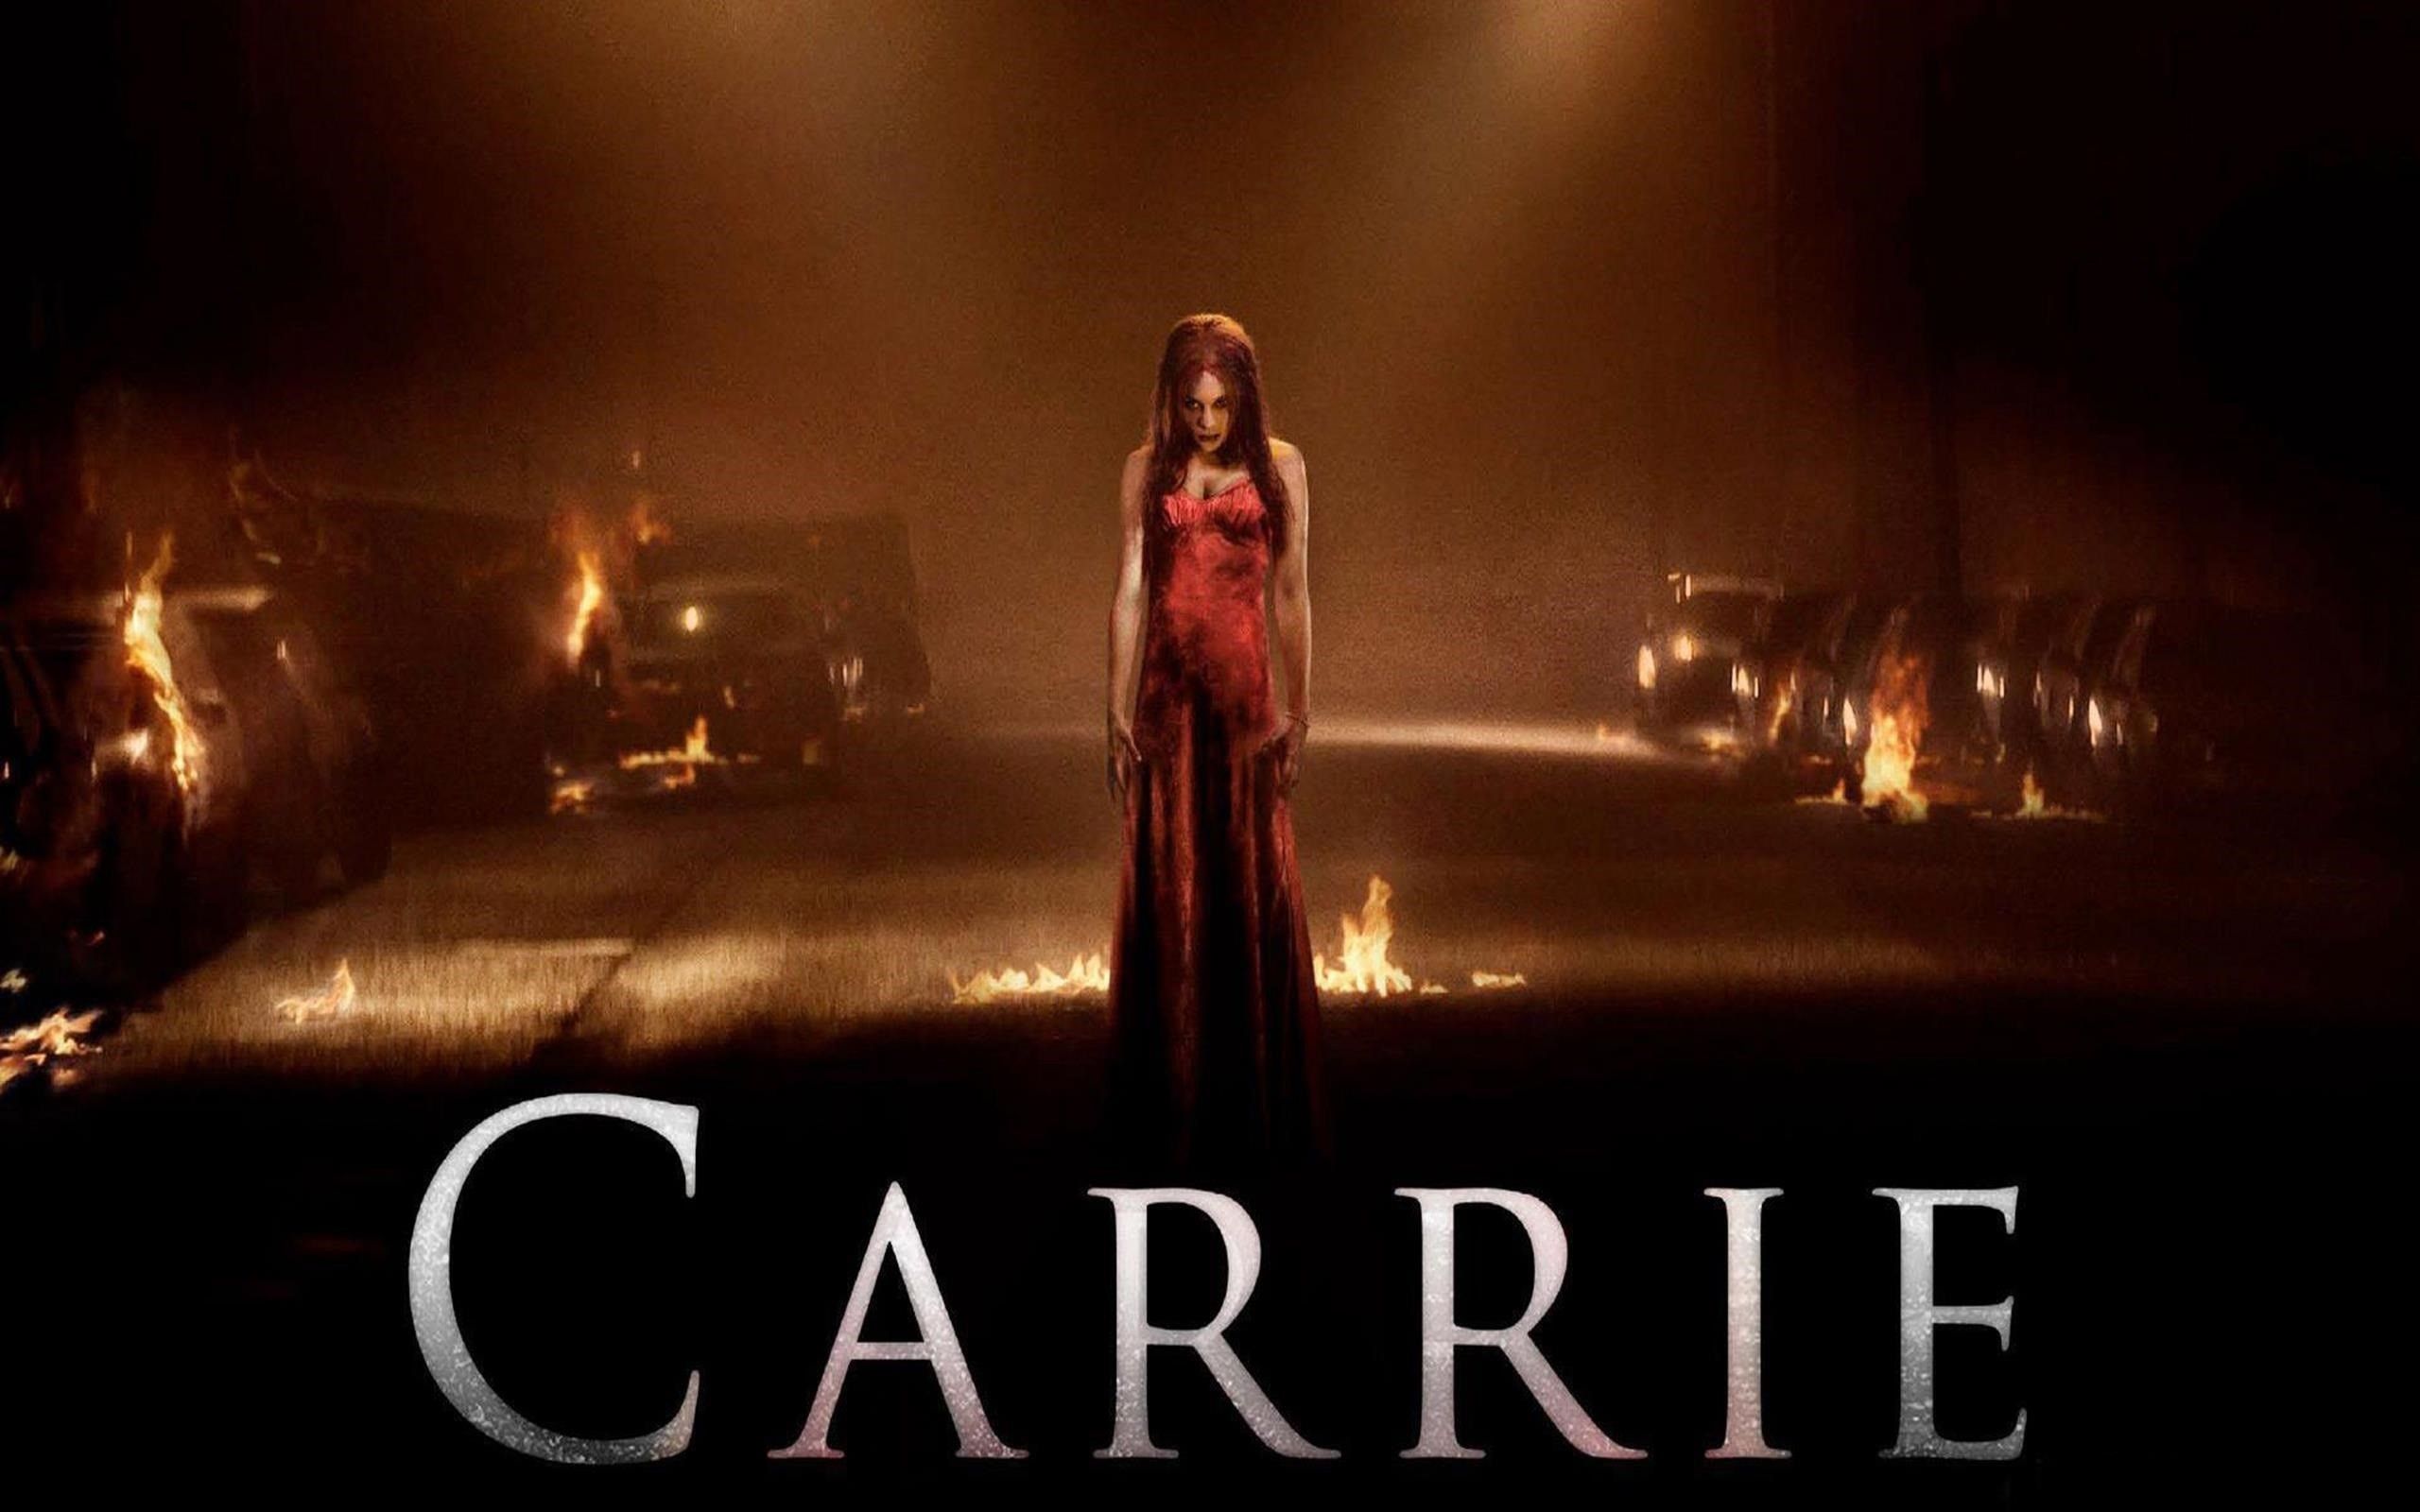 Carrie Upcoming 2014 Hollywood Horror Movie Wallpaper | HD Wallpapers